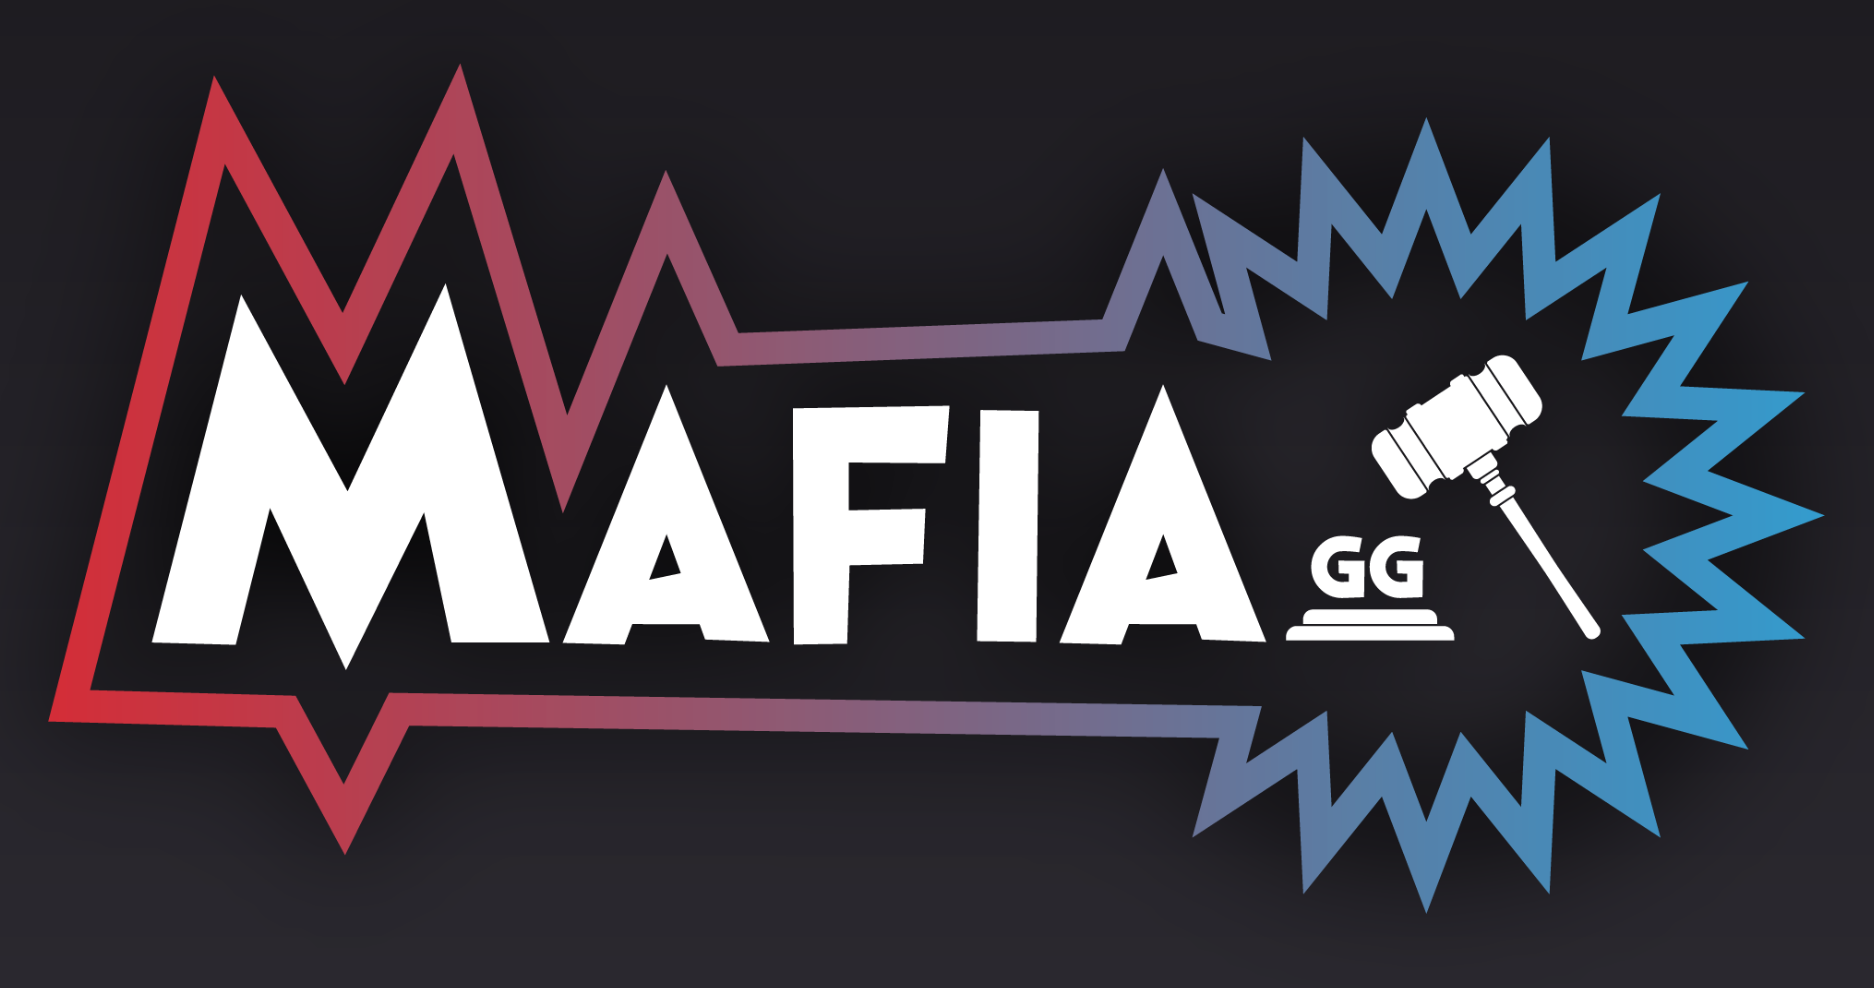 How to Play Mafia Online with the Party Mafia app 